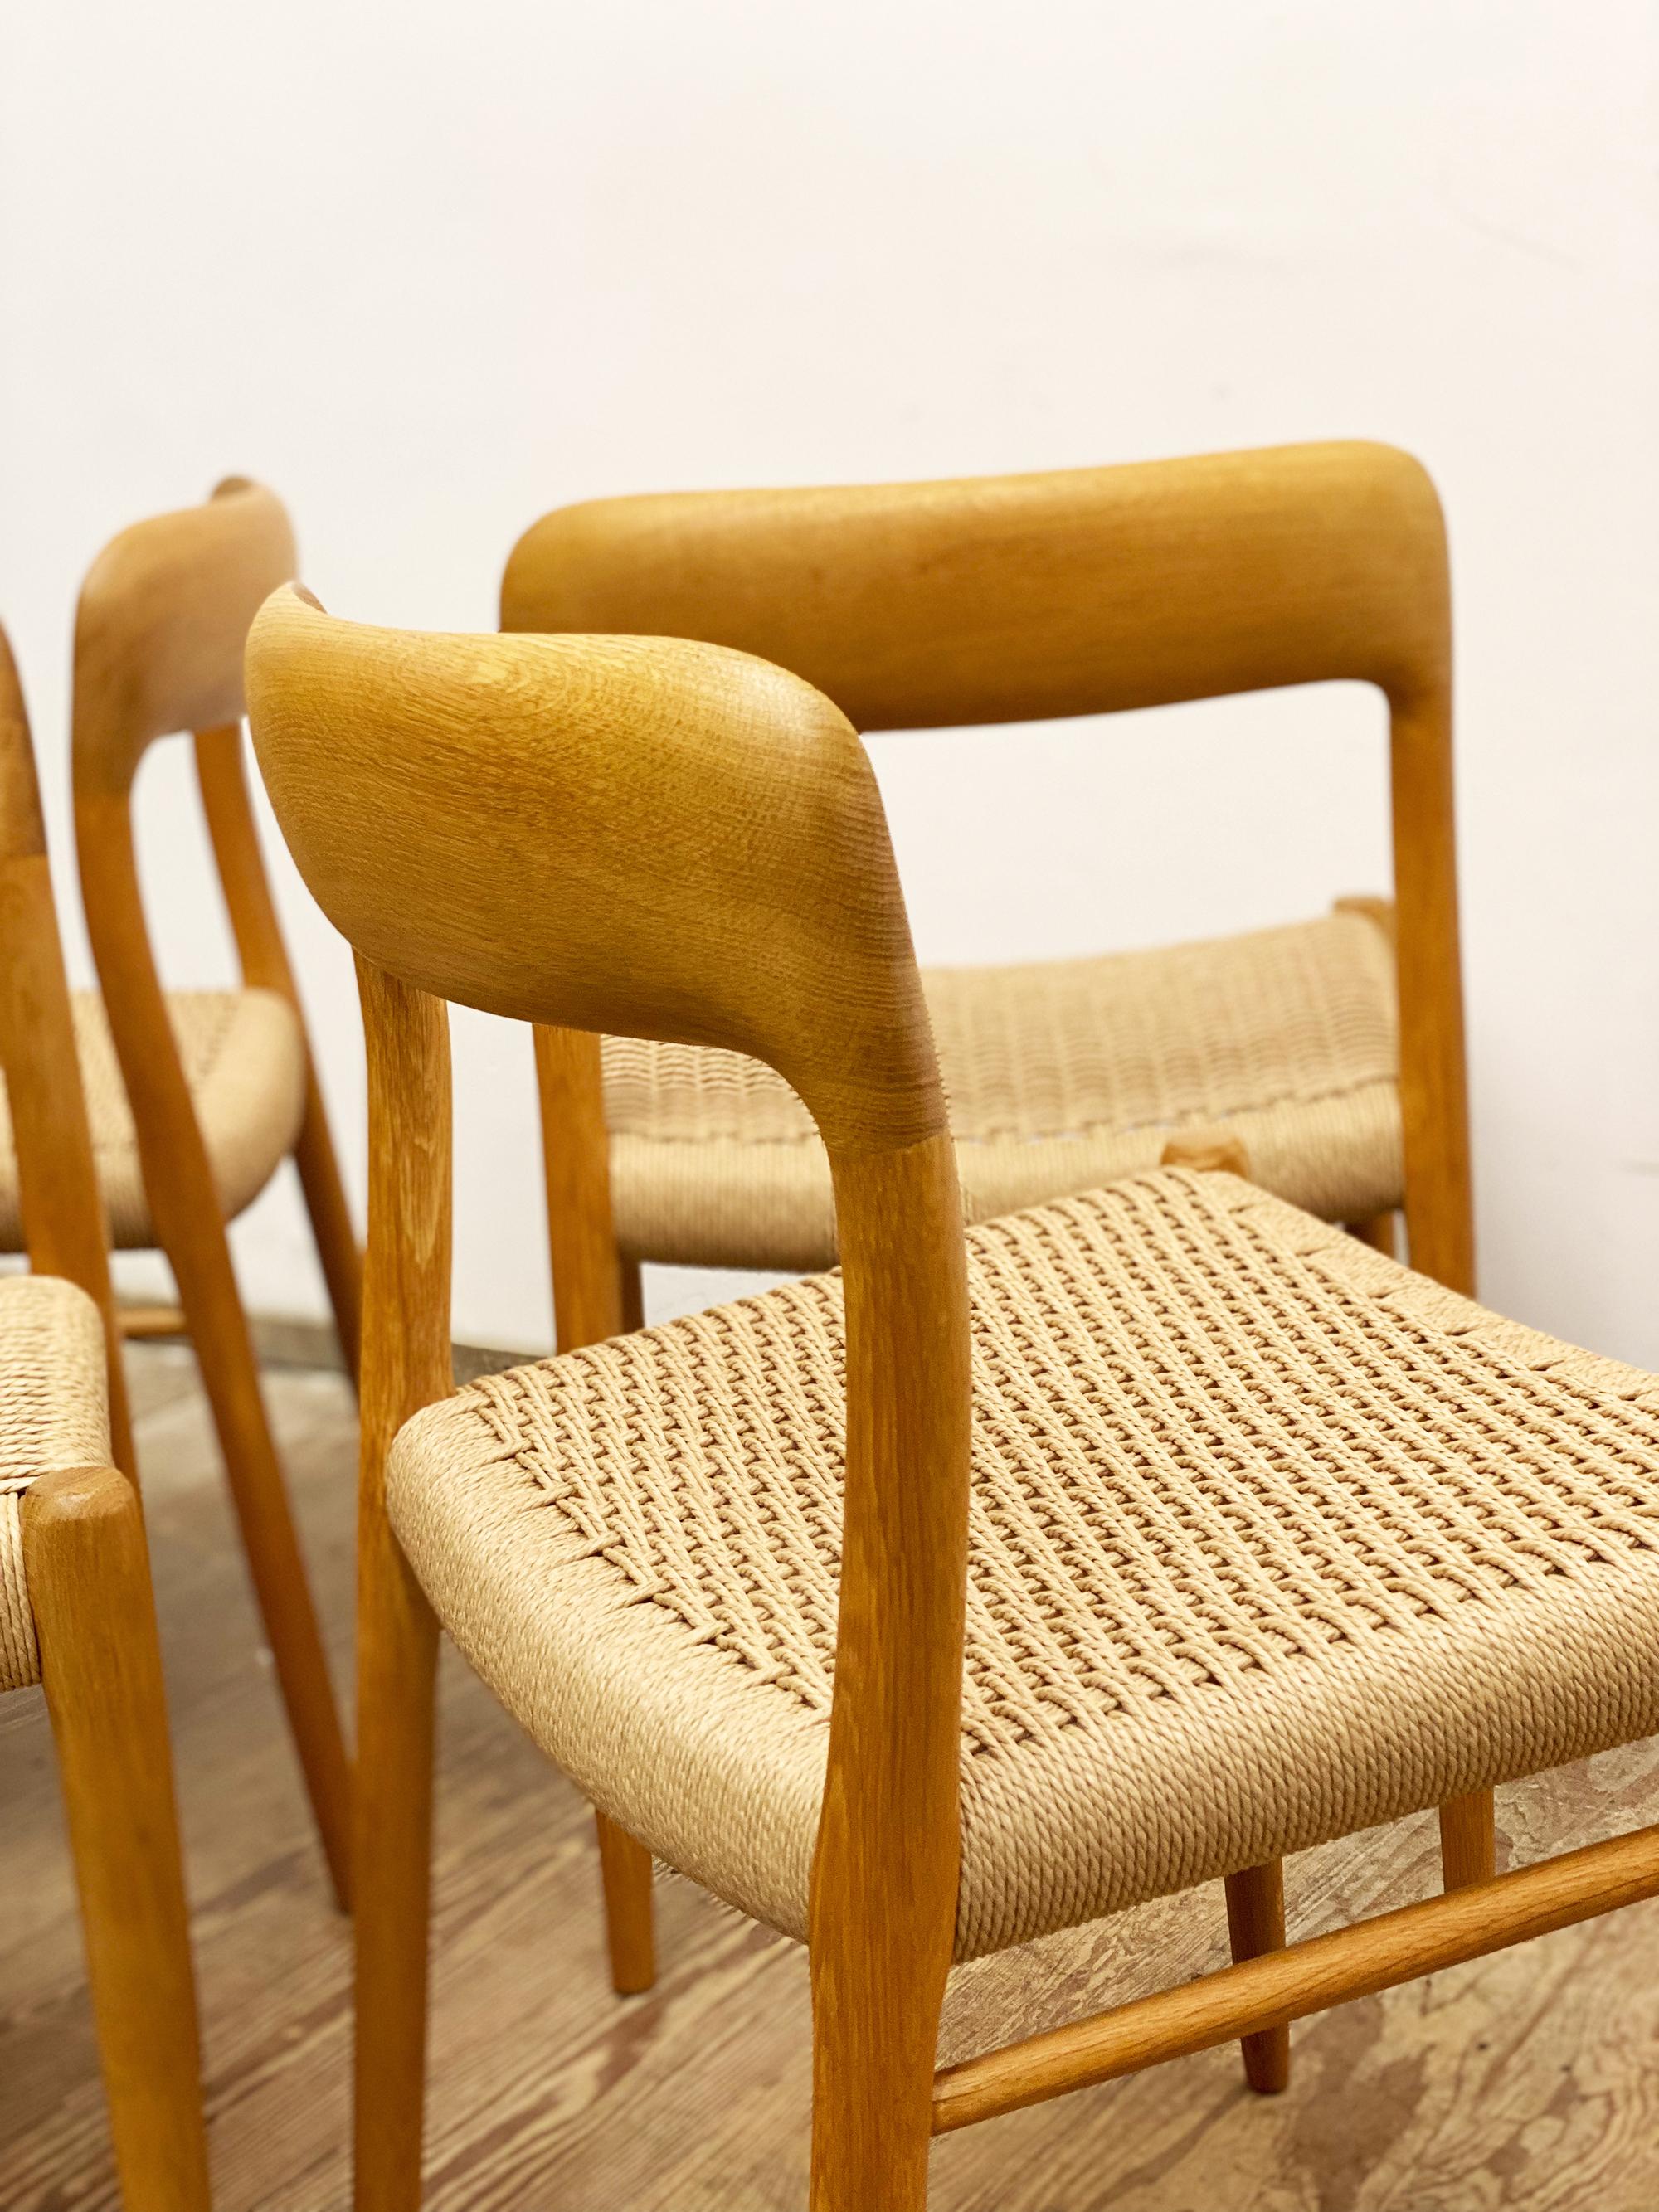 Papercord Mid-Century Oak Dining Chairs #75, Niels O. Møller for J. L. Moller, Set of 4